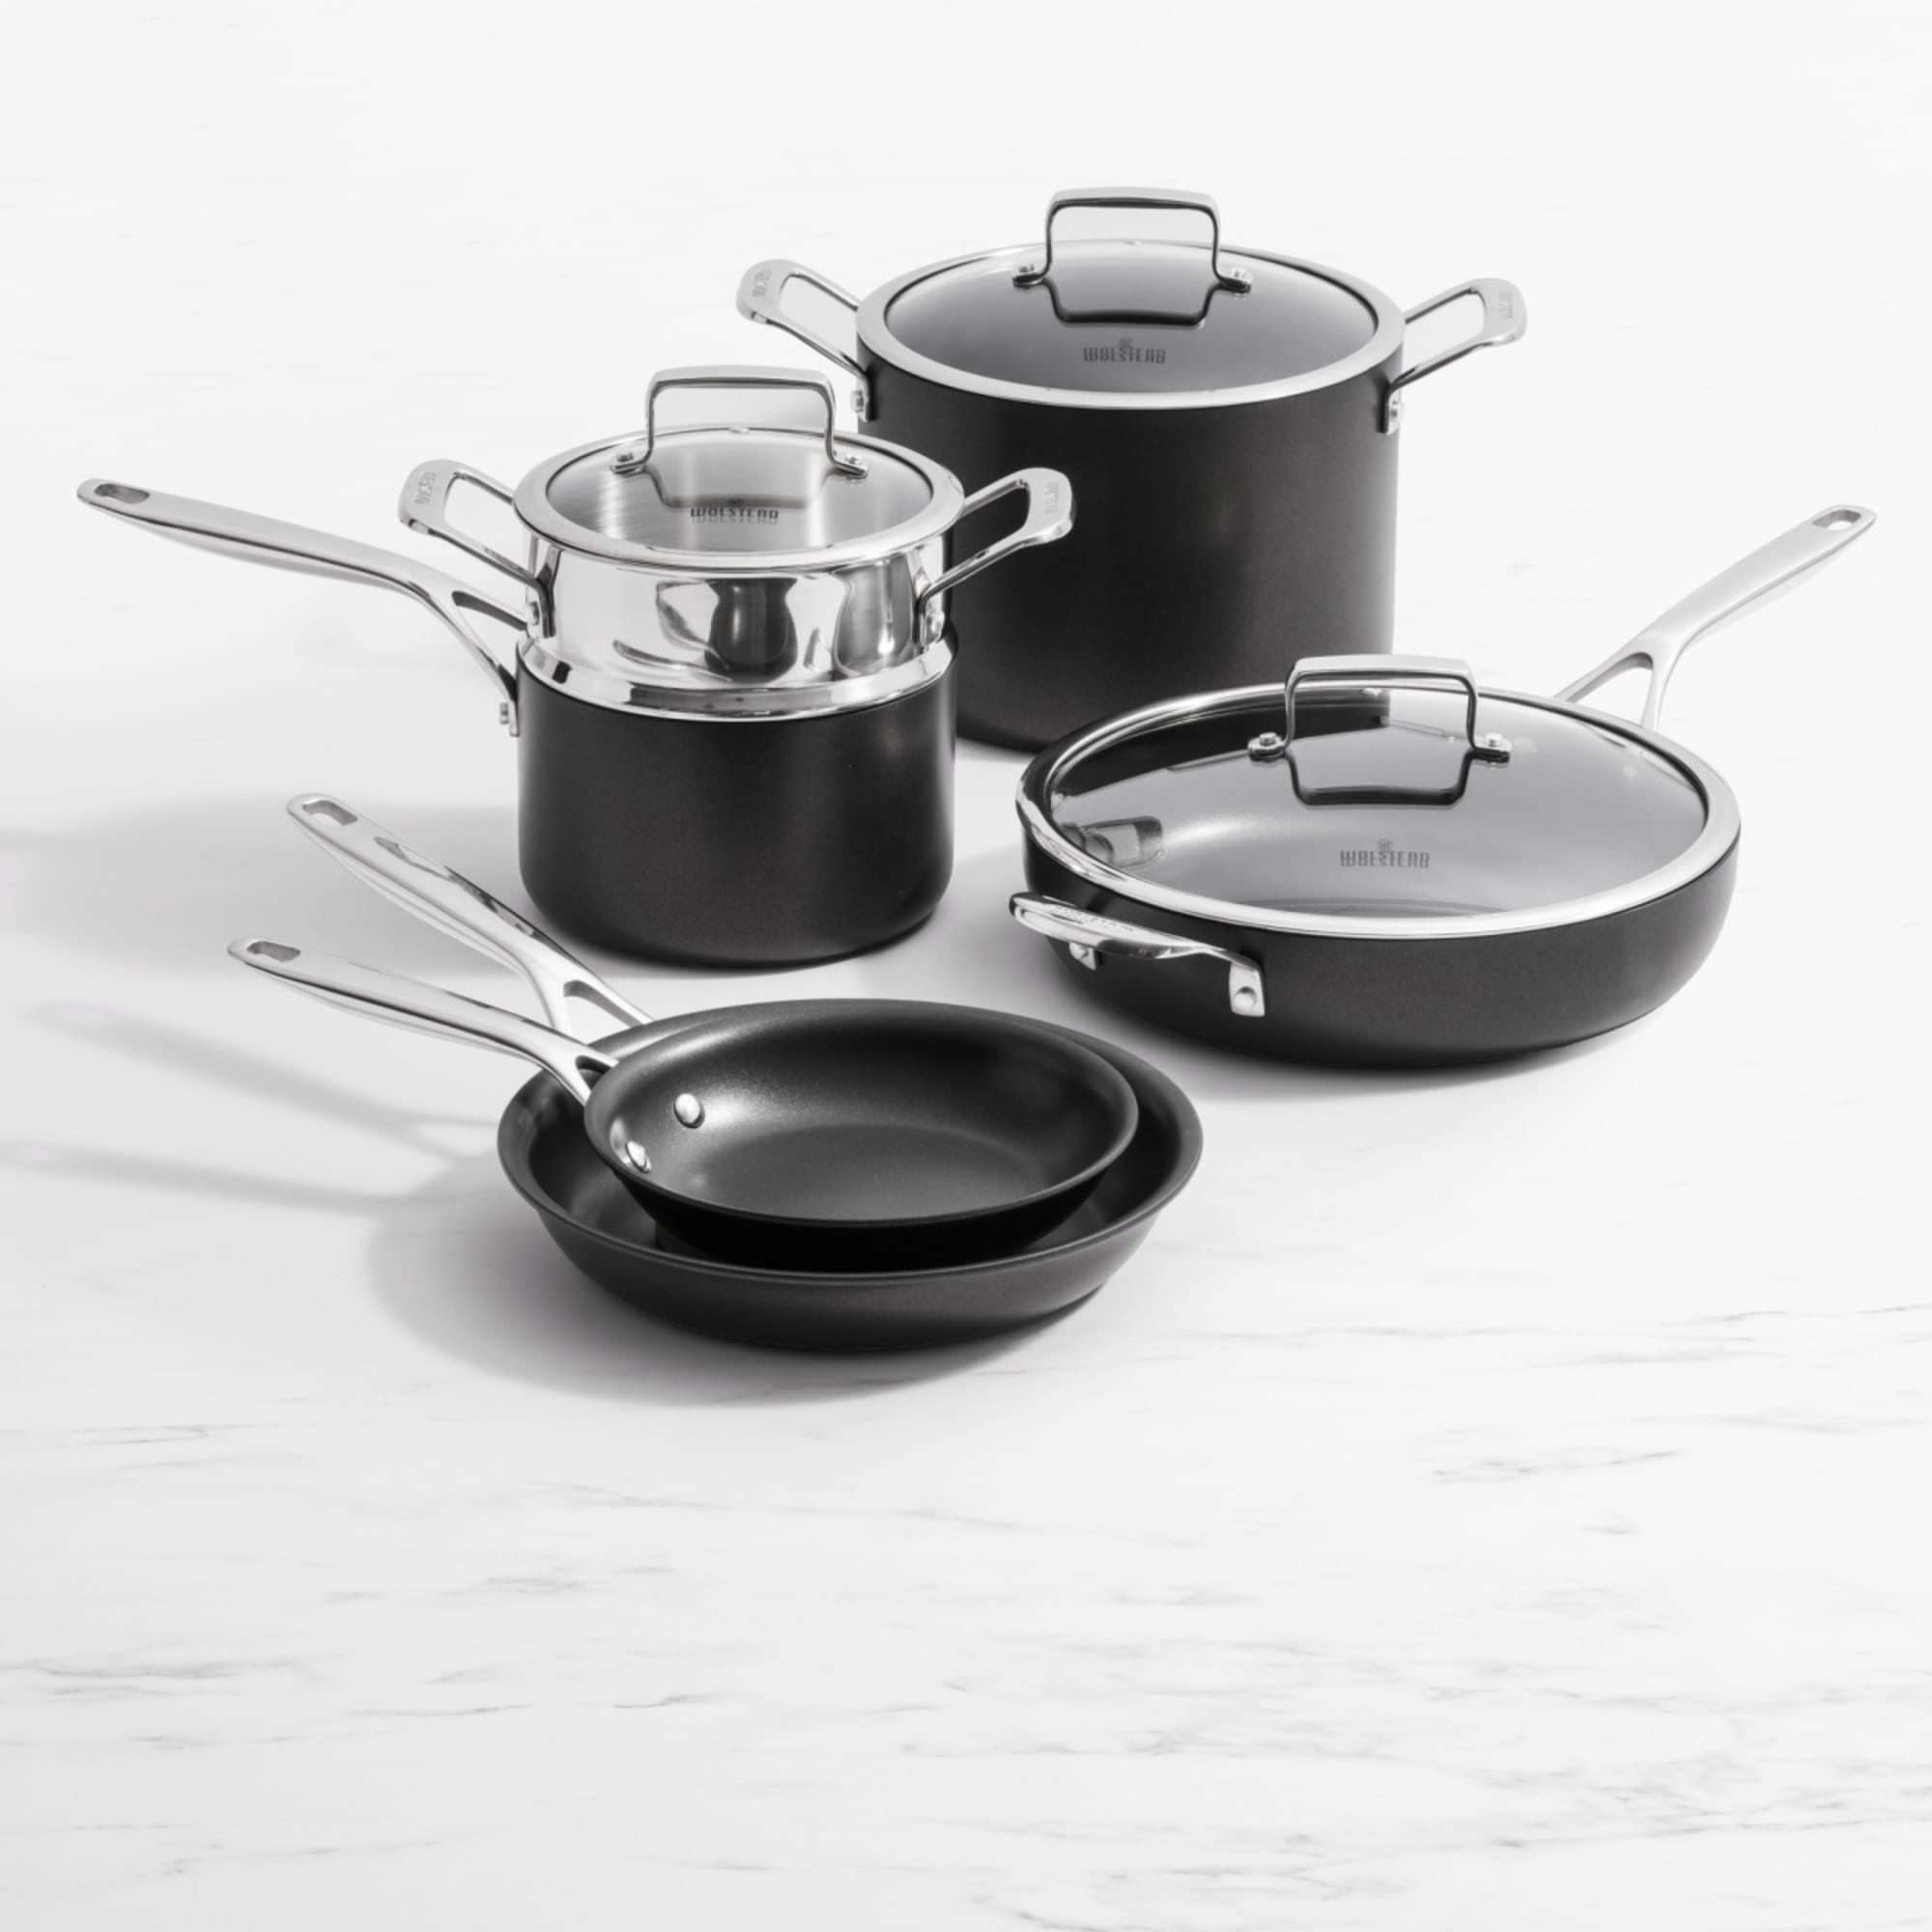 GreenLife Gourmet Ceramic Non-Stick Hard Anodized Cookware Set Review -  Kitchen Wise Tools